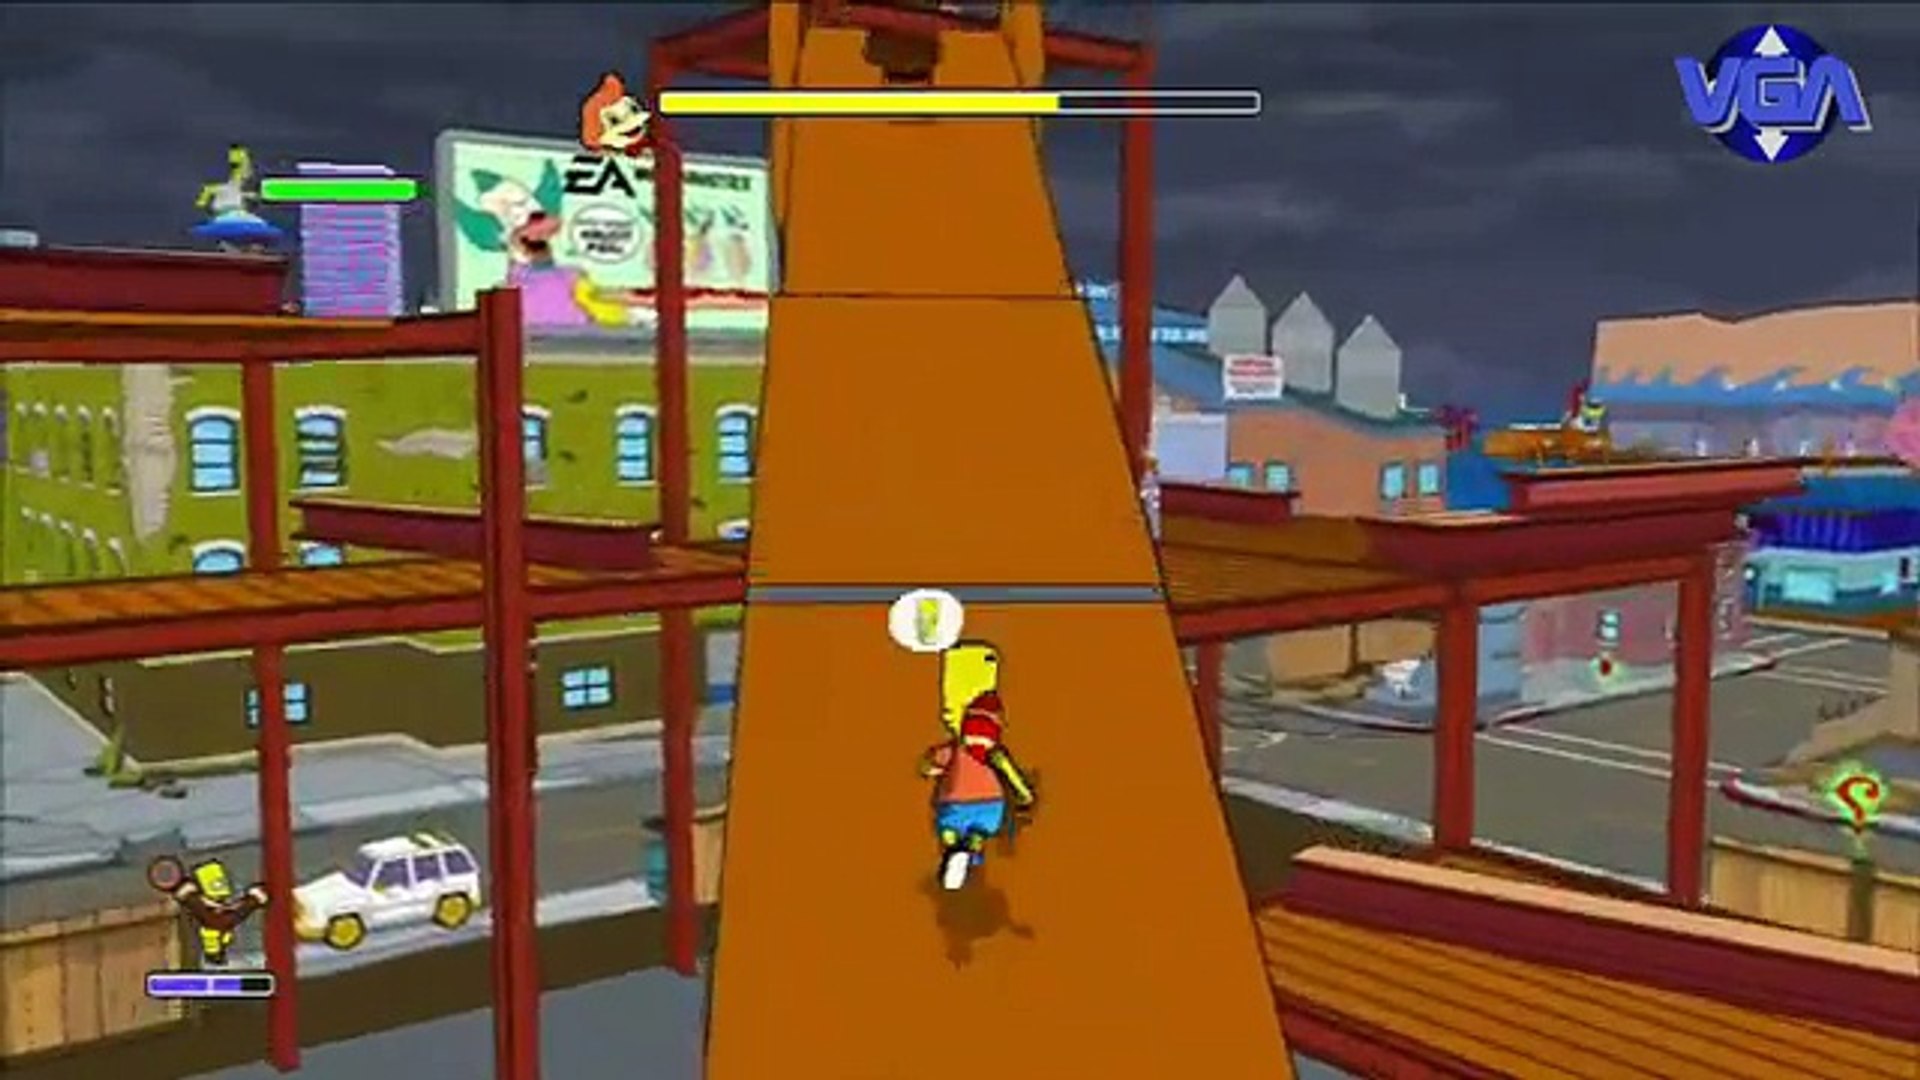 VGA Les simpsons le jeu gameplay ps3 x box 360 pc wii psp ds 2007 HD –  Видео Dailymotion